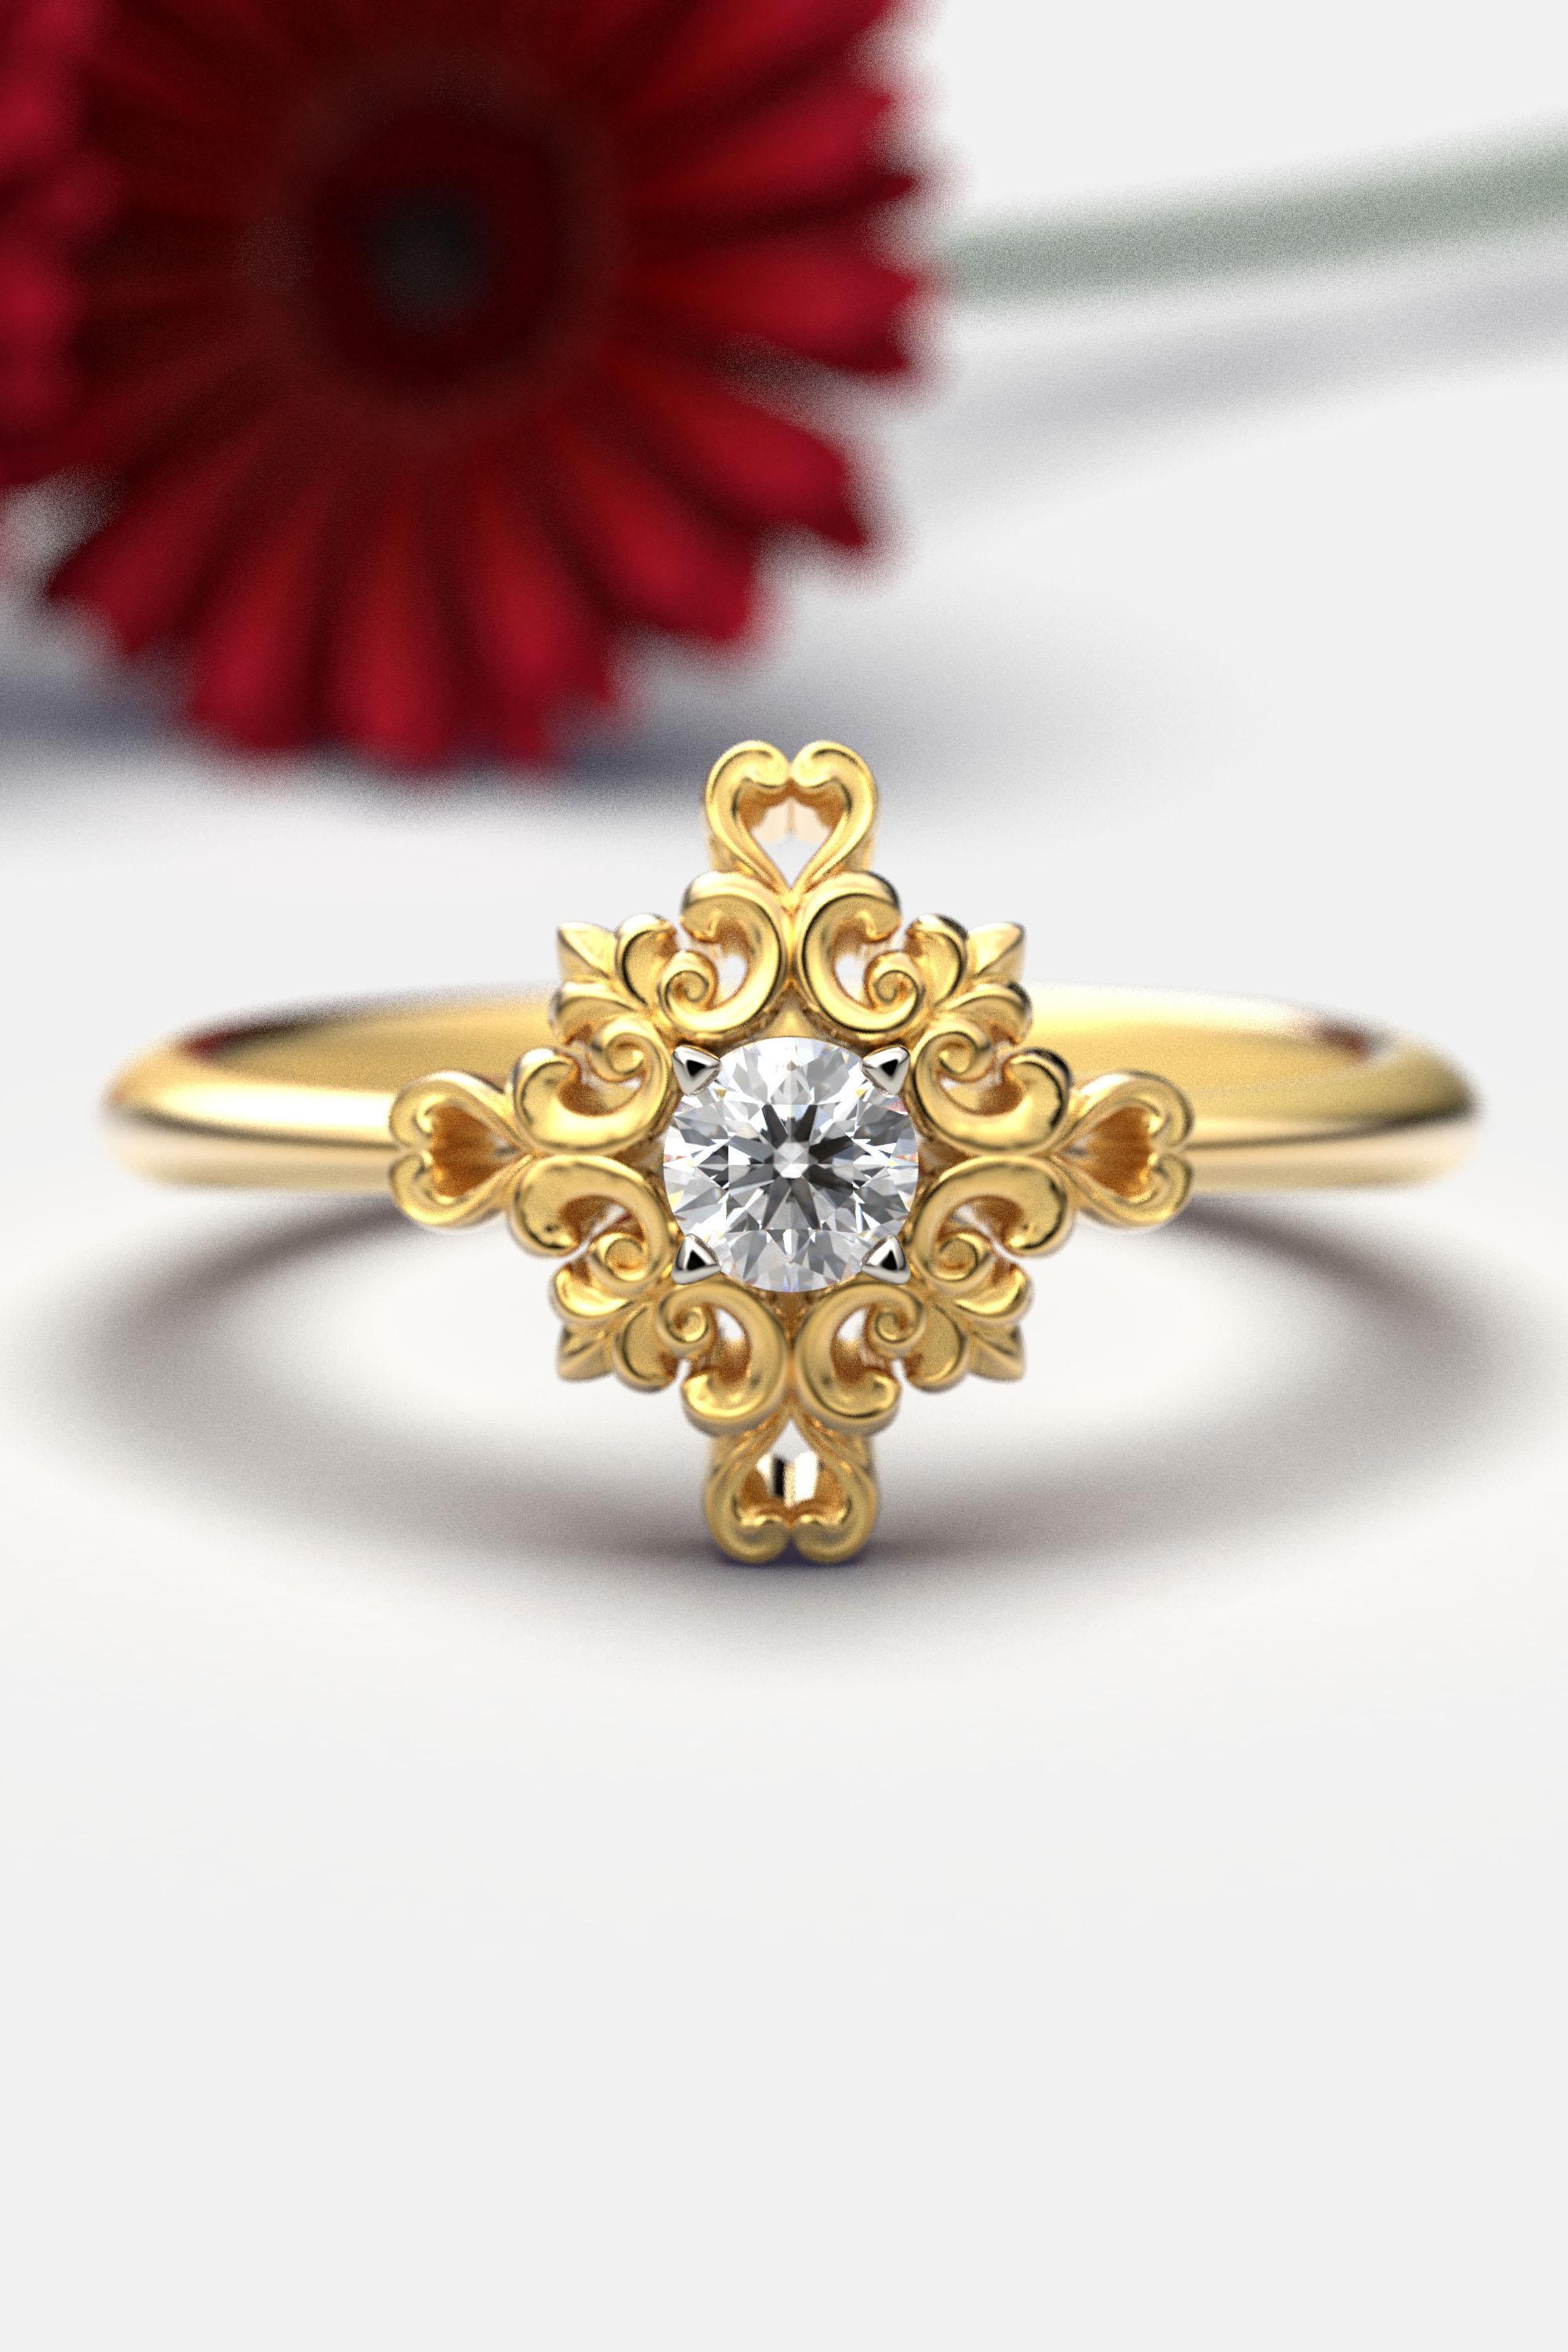 For Sale:  Italian Diamond Engagement Ring with Baroque Setting 18k gold 3